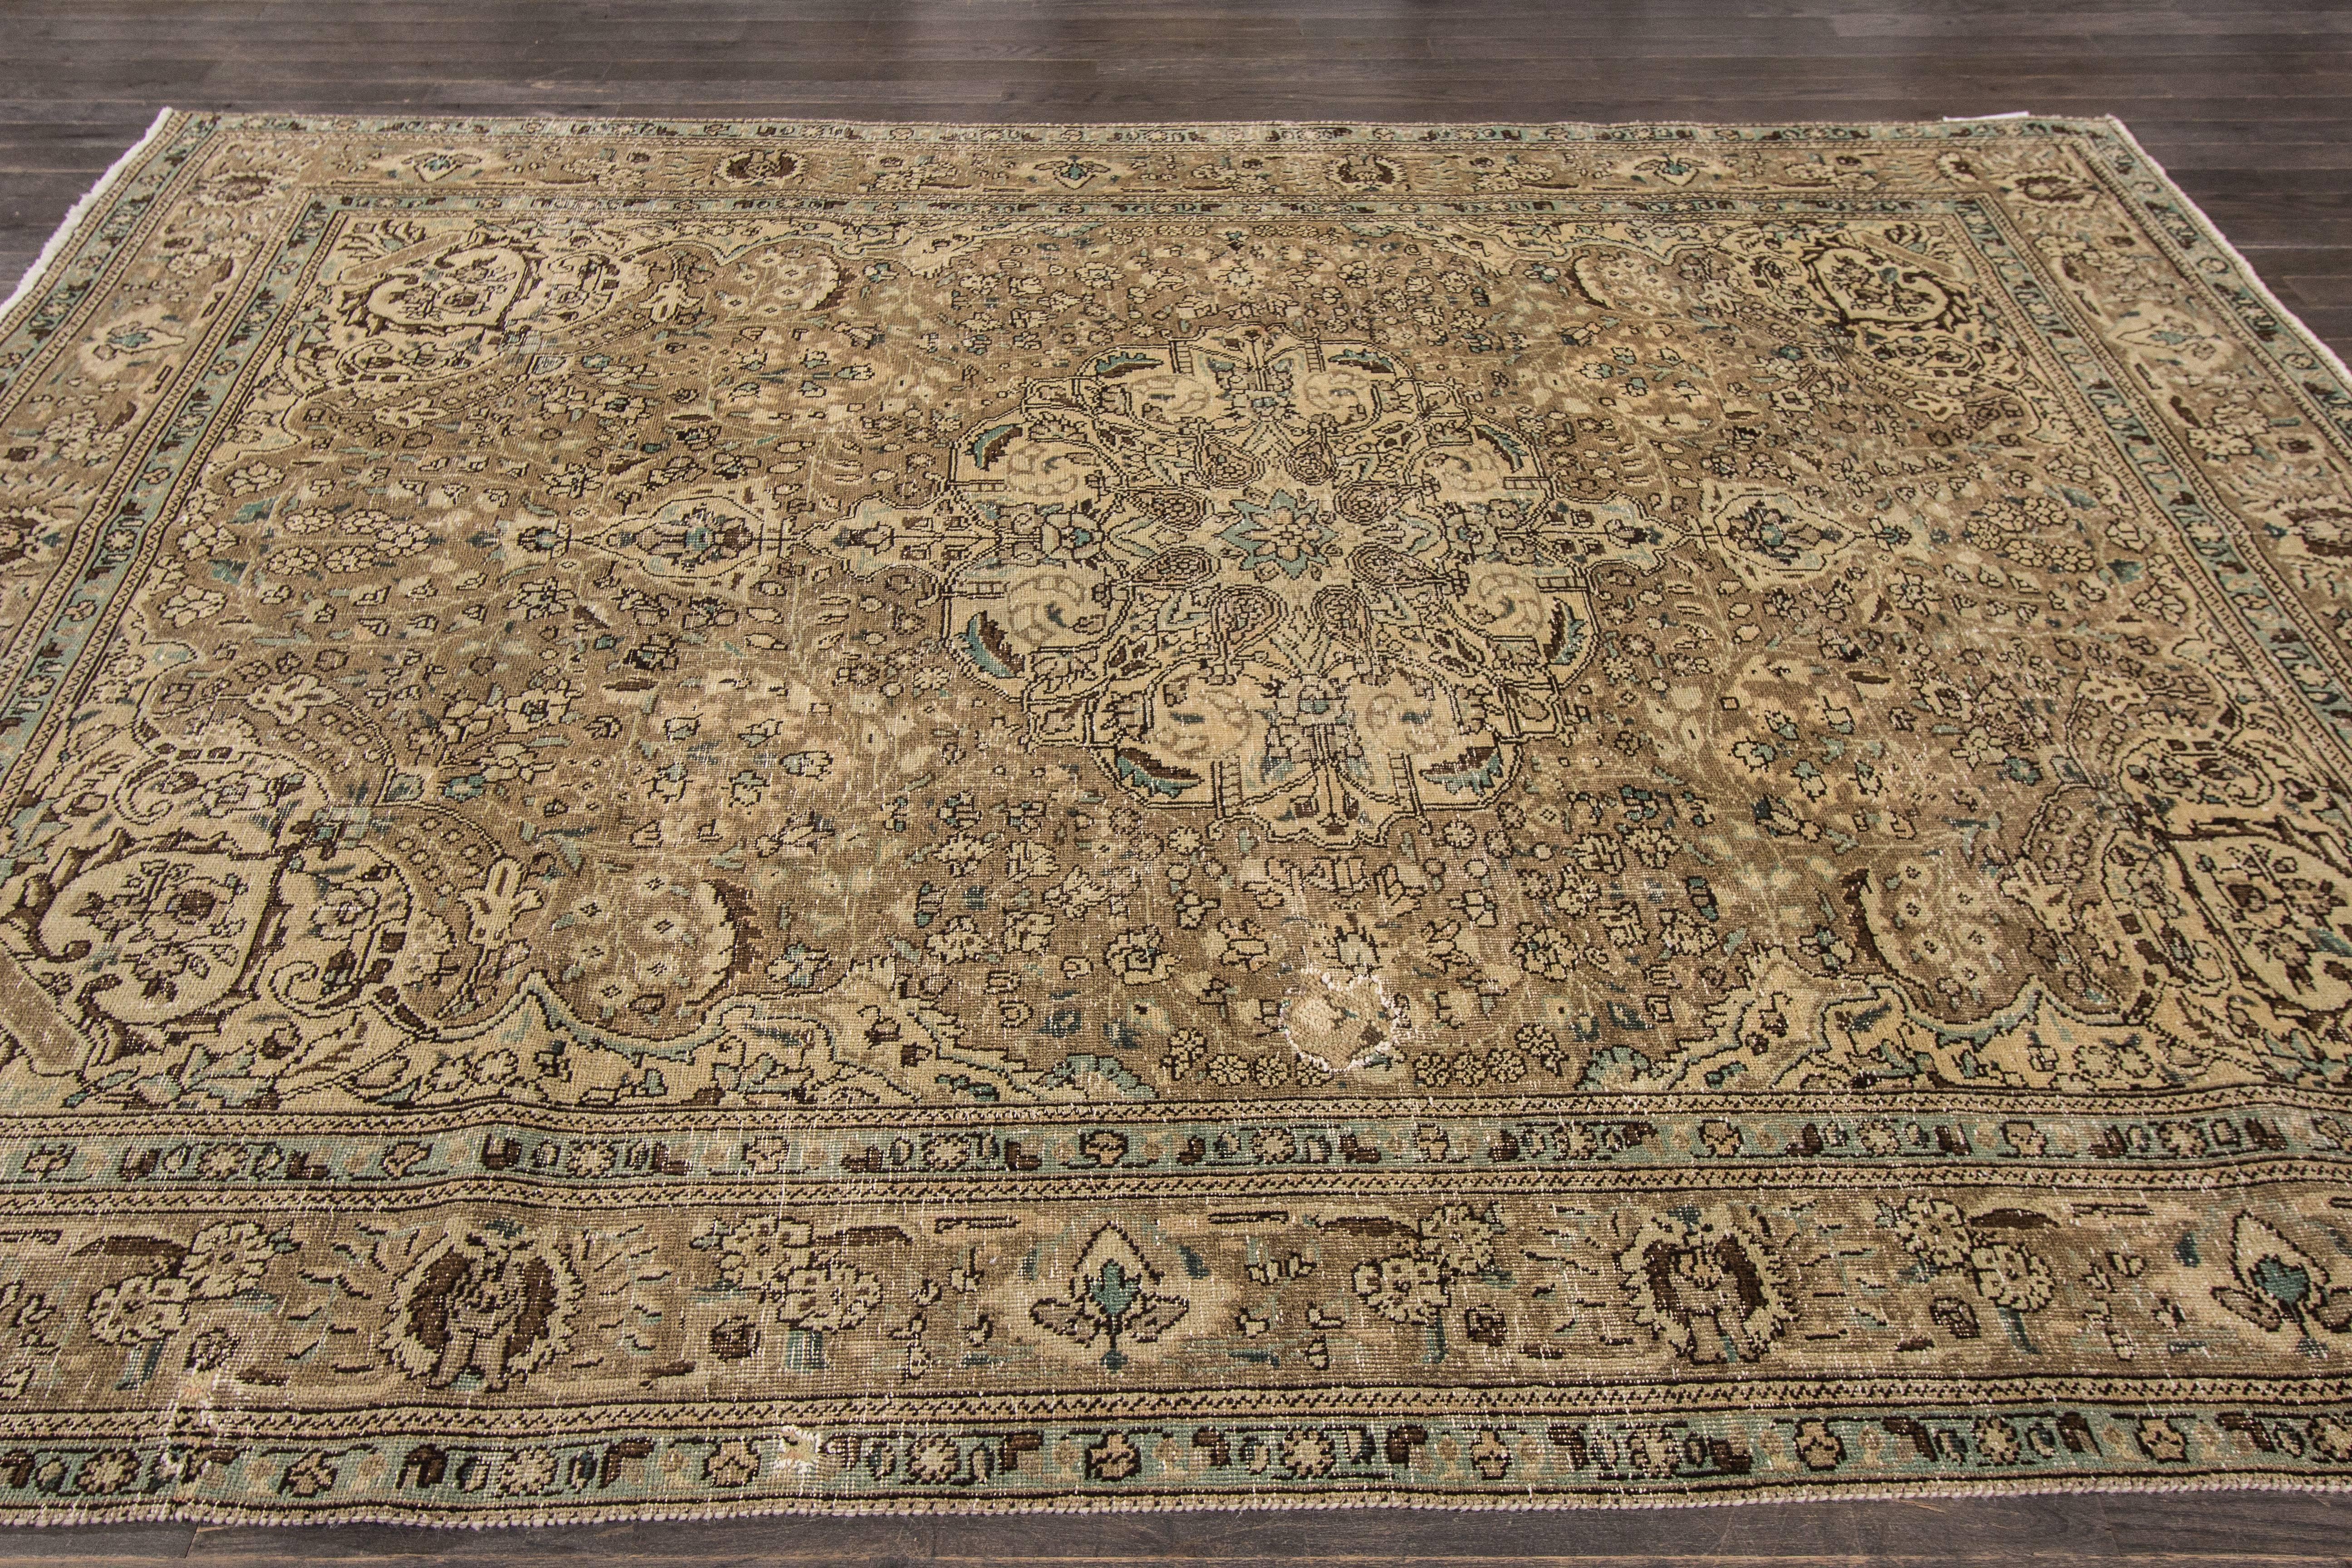 Measures: 7'.2 x 9'.7
A hand-knotted antique Persian Tabriz rug with a floral design on a beige field. Accents of brown and green throughout the piece.